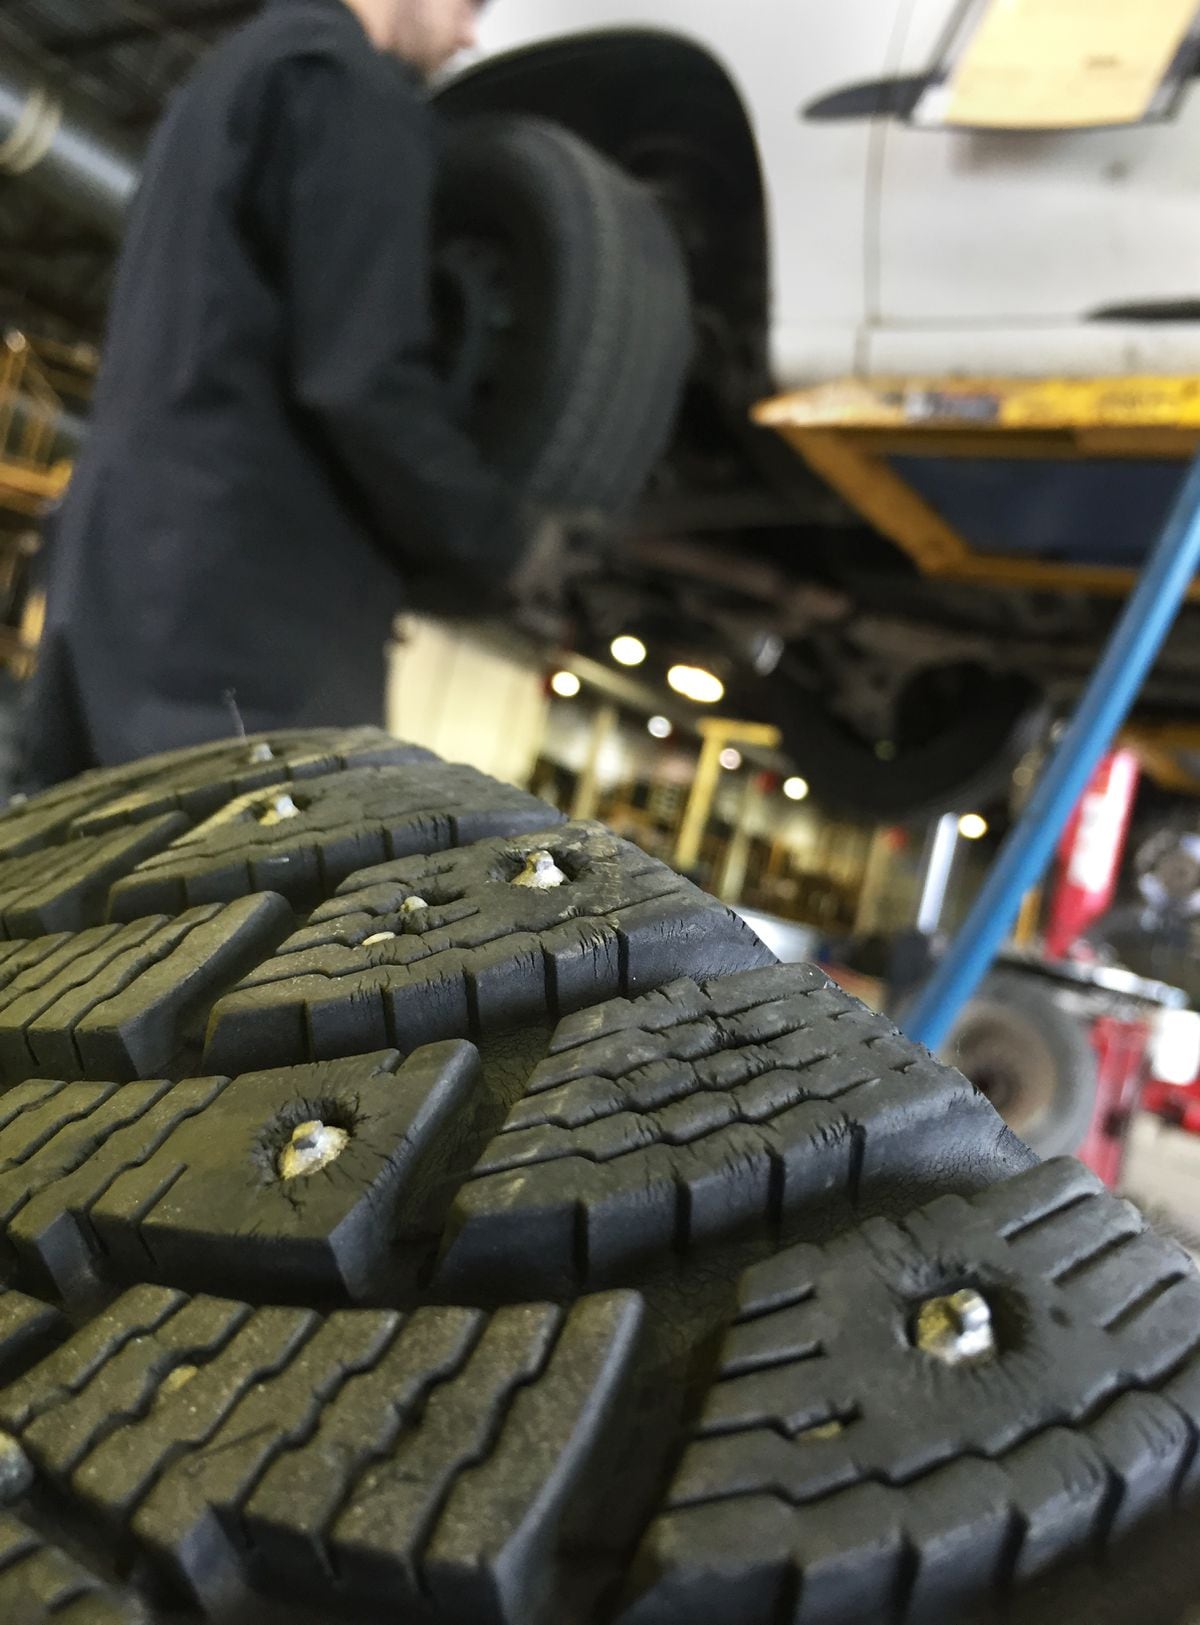 Winter is coming Studded tires are now legal in most of Alaska